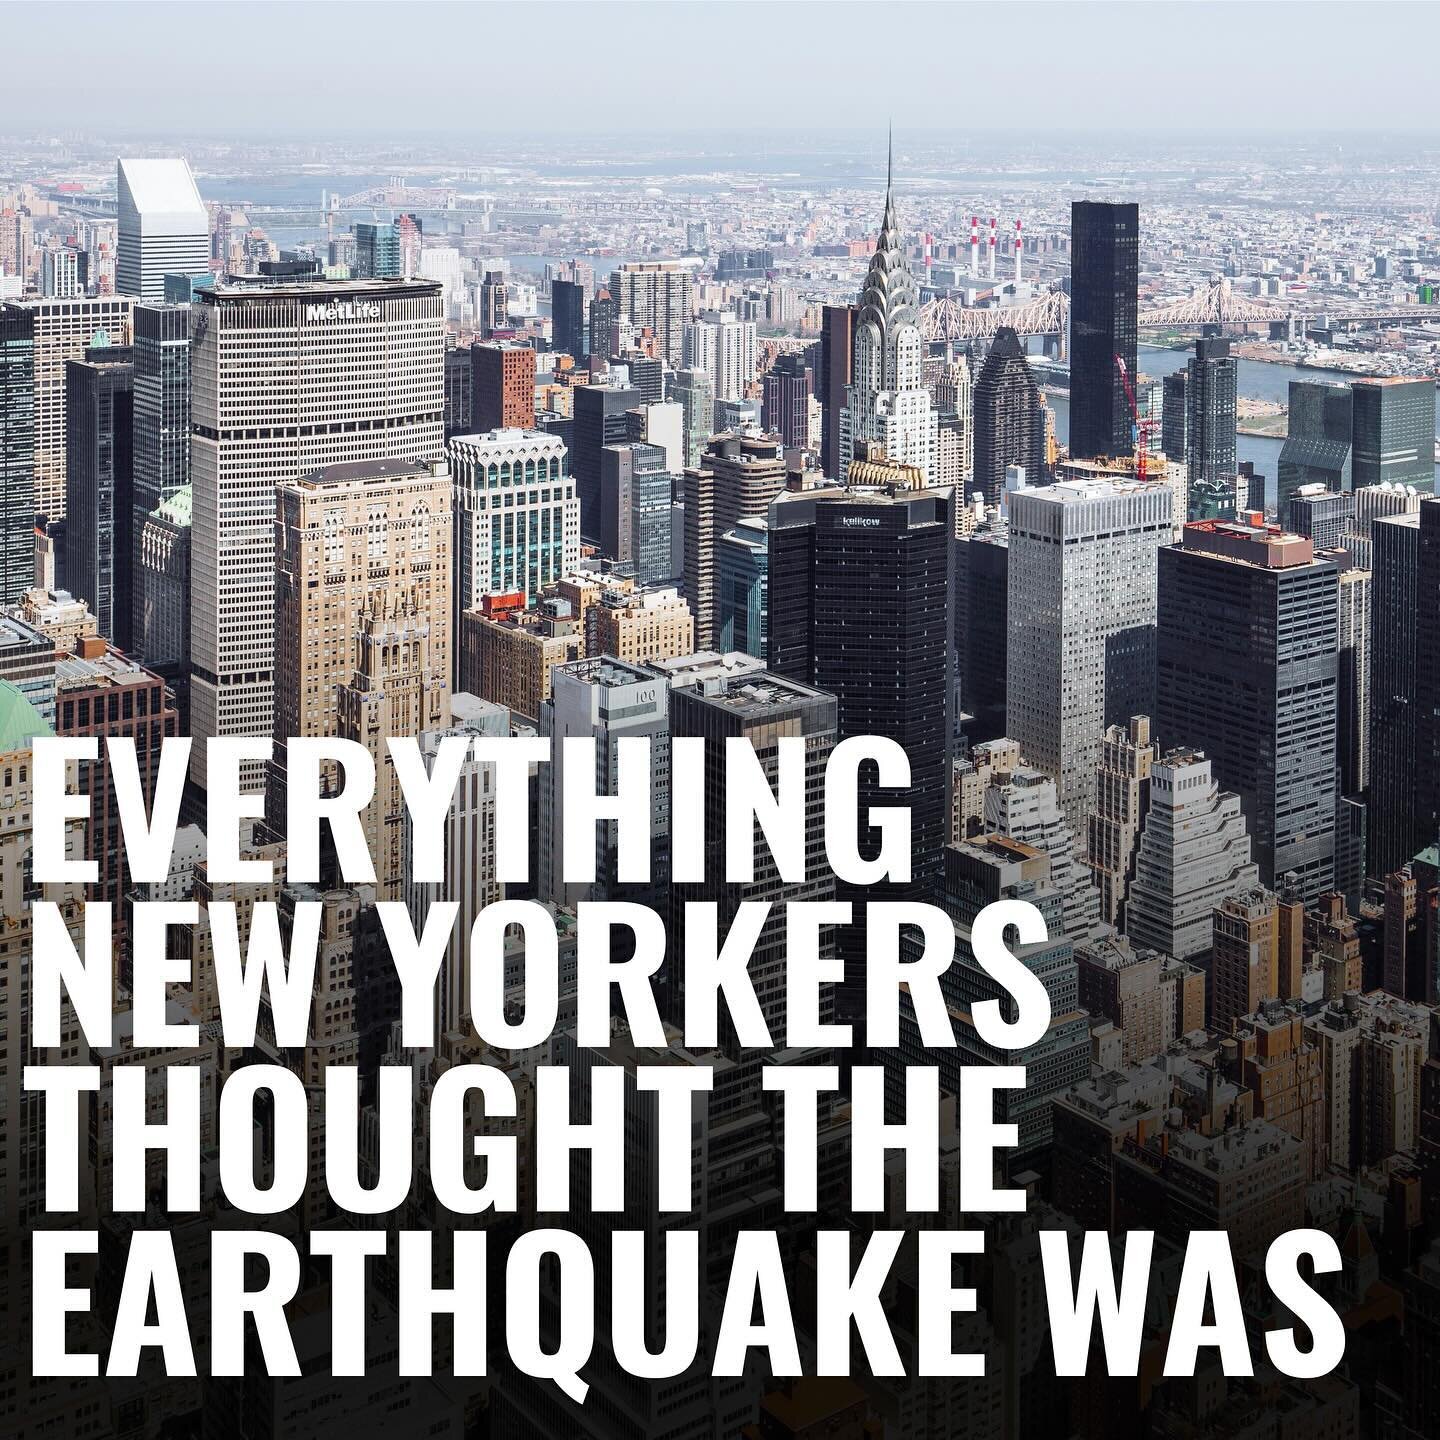 Have New Yorkers ever known peace? They really thought it was just a trailer truck on their street 🤦&zwj;♀️

#thequake #earthquake